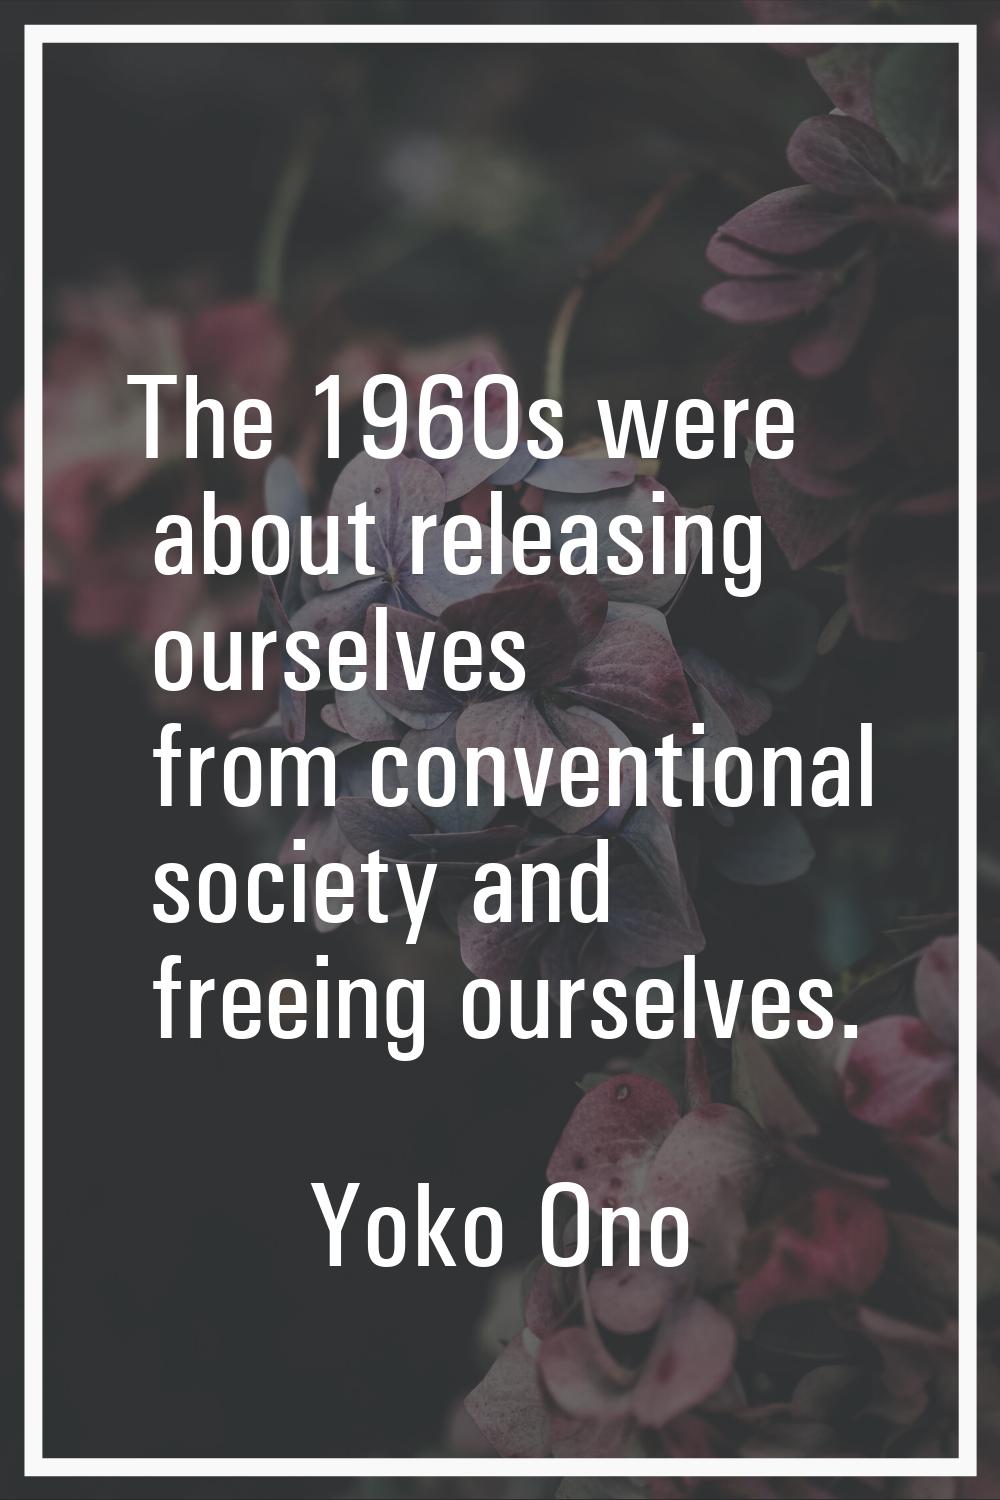 The 1960s were about releasing ourselves from conventional society and freeing ourselves.